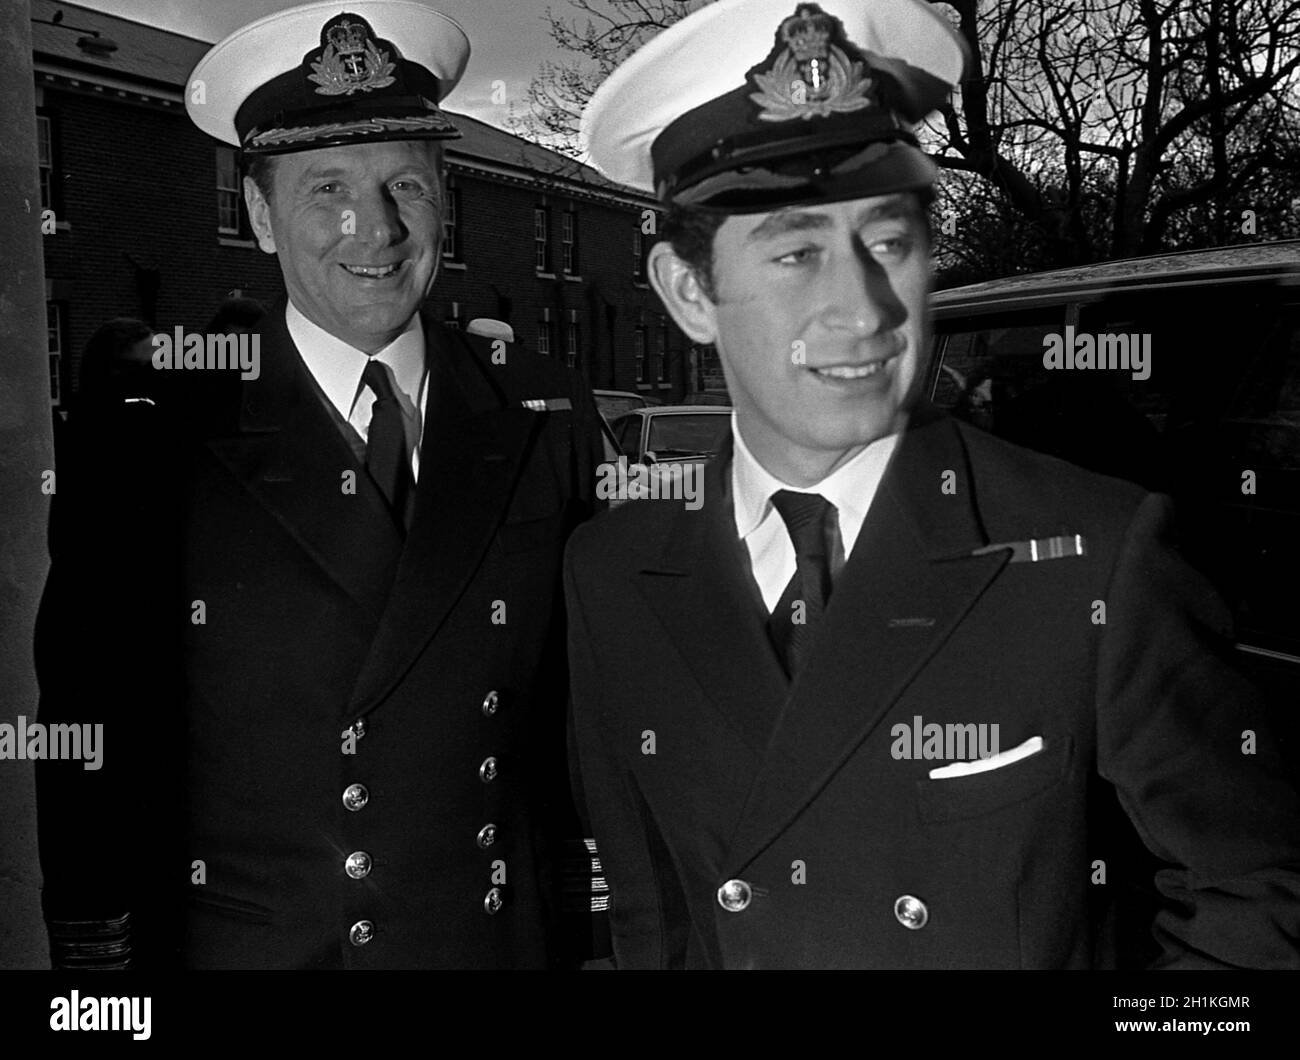 AJAXNETPHOTO. 12TH JANUARY, 1976. PORTSMOUTH, ENGLAND, - PRINCE STARTS COURSE - HRH PRINCE CHARLES IN ROYAL NAVY UNIFORM ARRIVING AT HMS VERNON TO BEGIN A 4 WEEK COMMANDING OFFICER TRAINING COURSE IS WELCOMED BY BASE COMMANDING OFFICER CAPTAIN G.TRISTE RN (LEFT). PHOTO;JONATHAN EASTLAND/AJAX REF:761201_18A Stock Photo